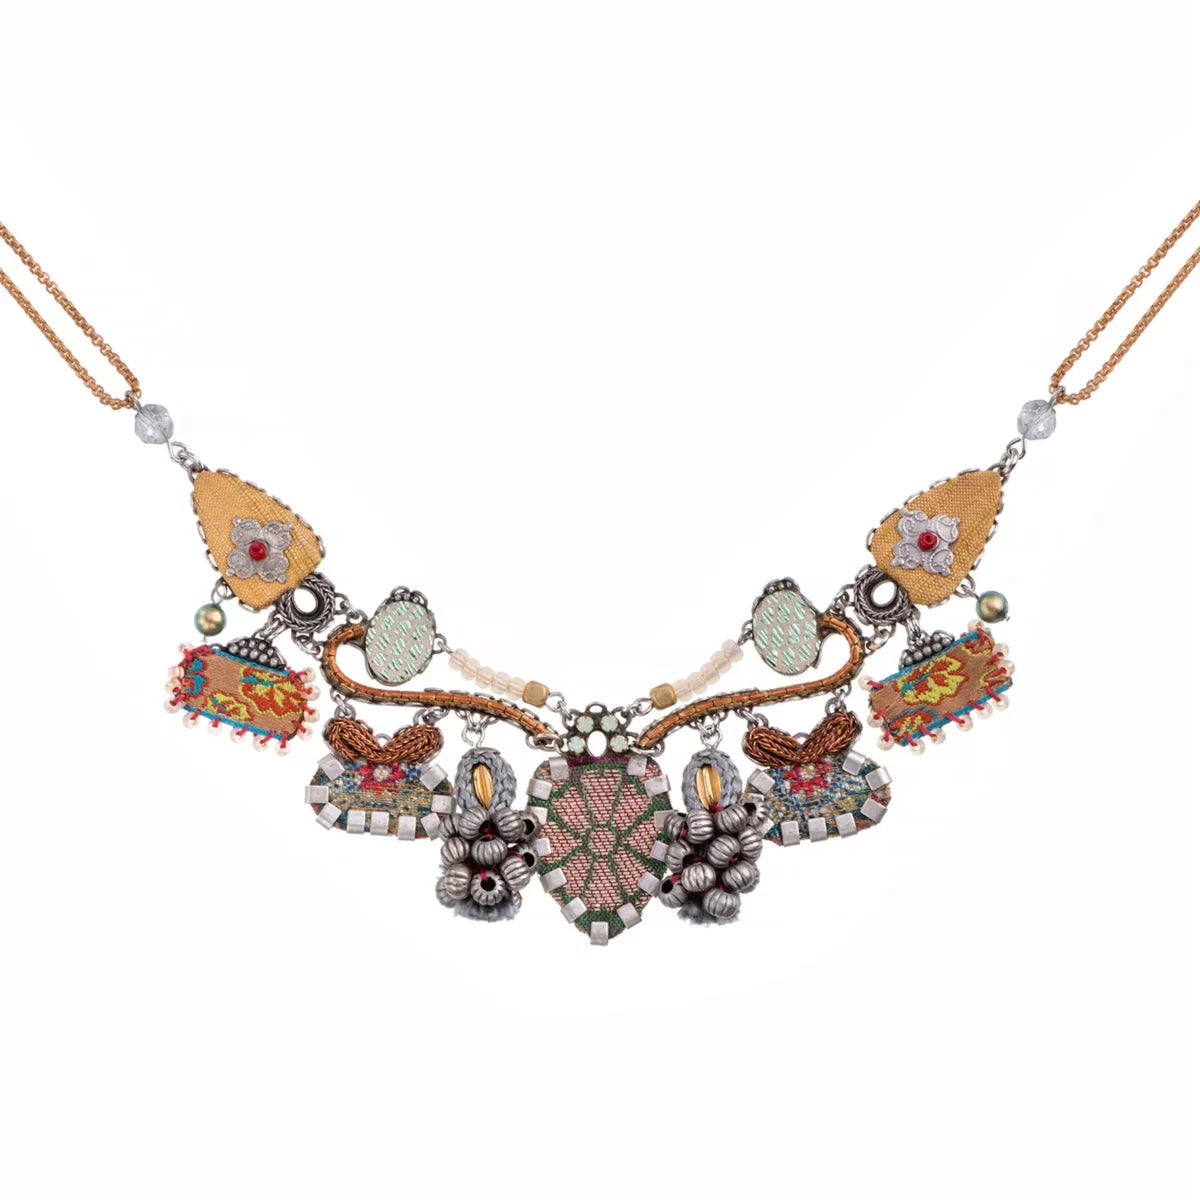 Champagne Joie Necklace - The Nancy Smillie Shop - Art, Jewellery & Designer Gifts Glasgow